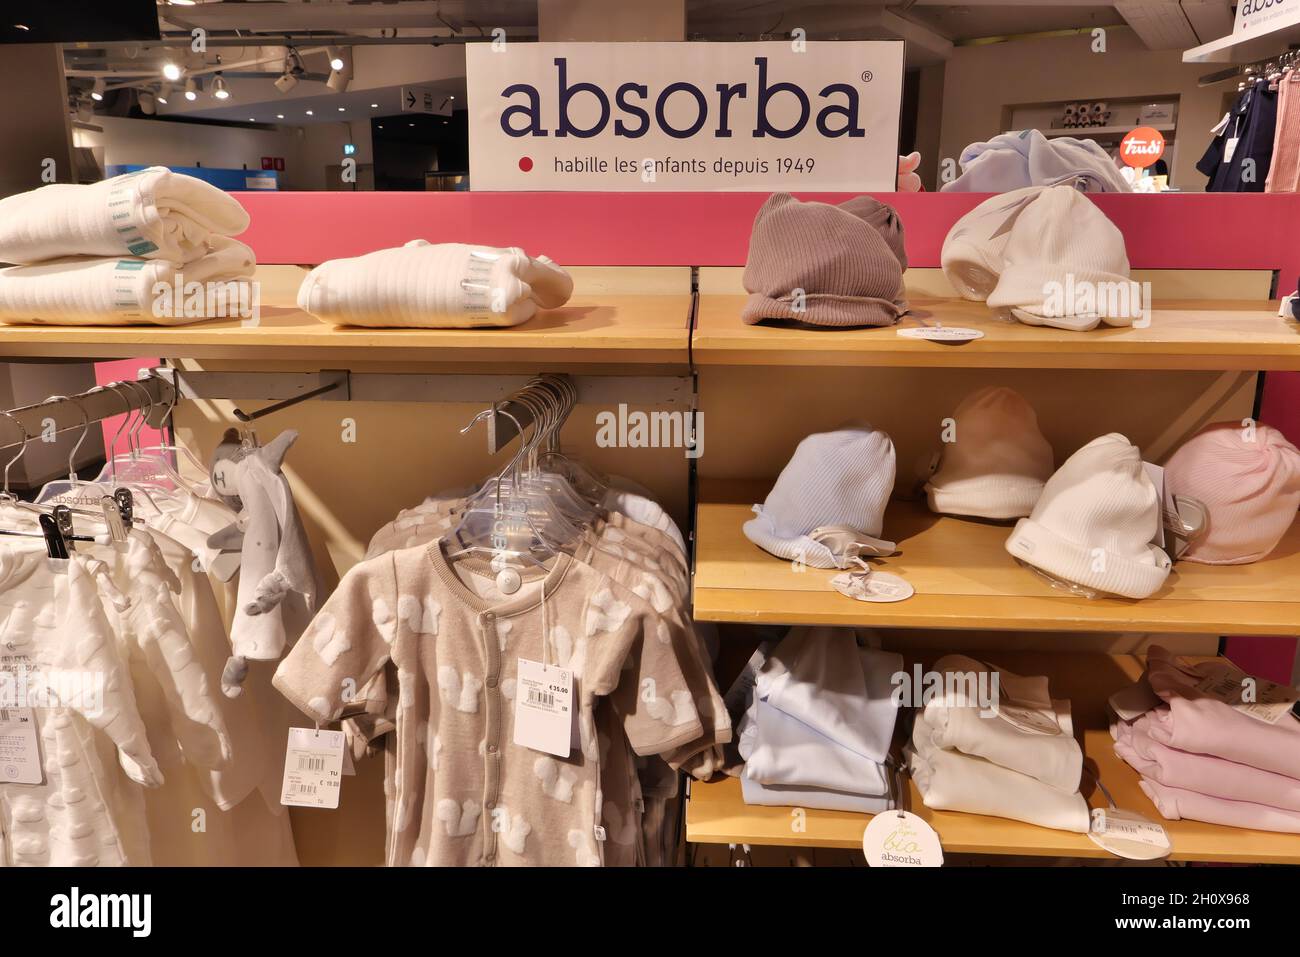 ABSORBA CHILDREN'S CLOTHING ON DISPLAY INSIDE THE FASHION STORE Stock Photo